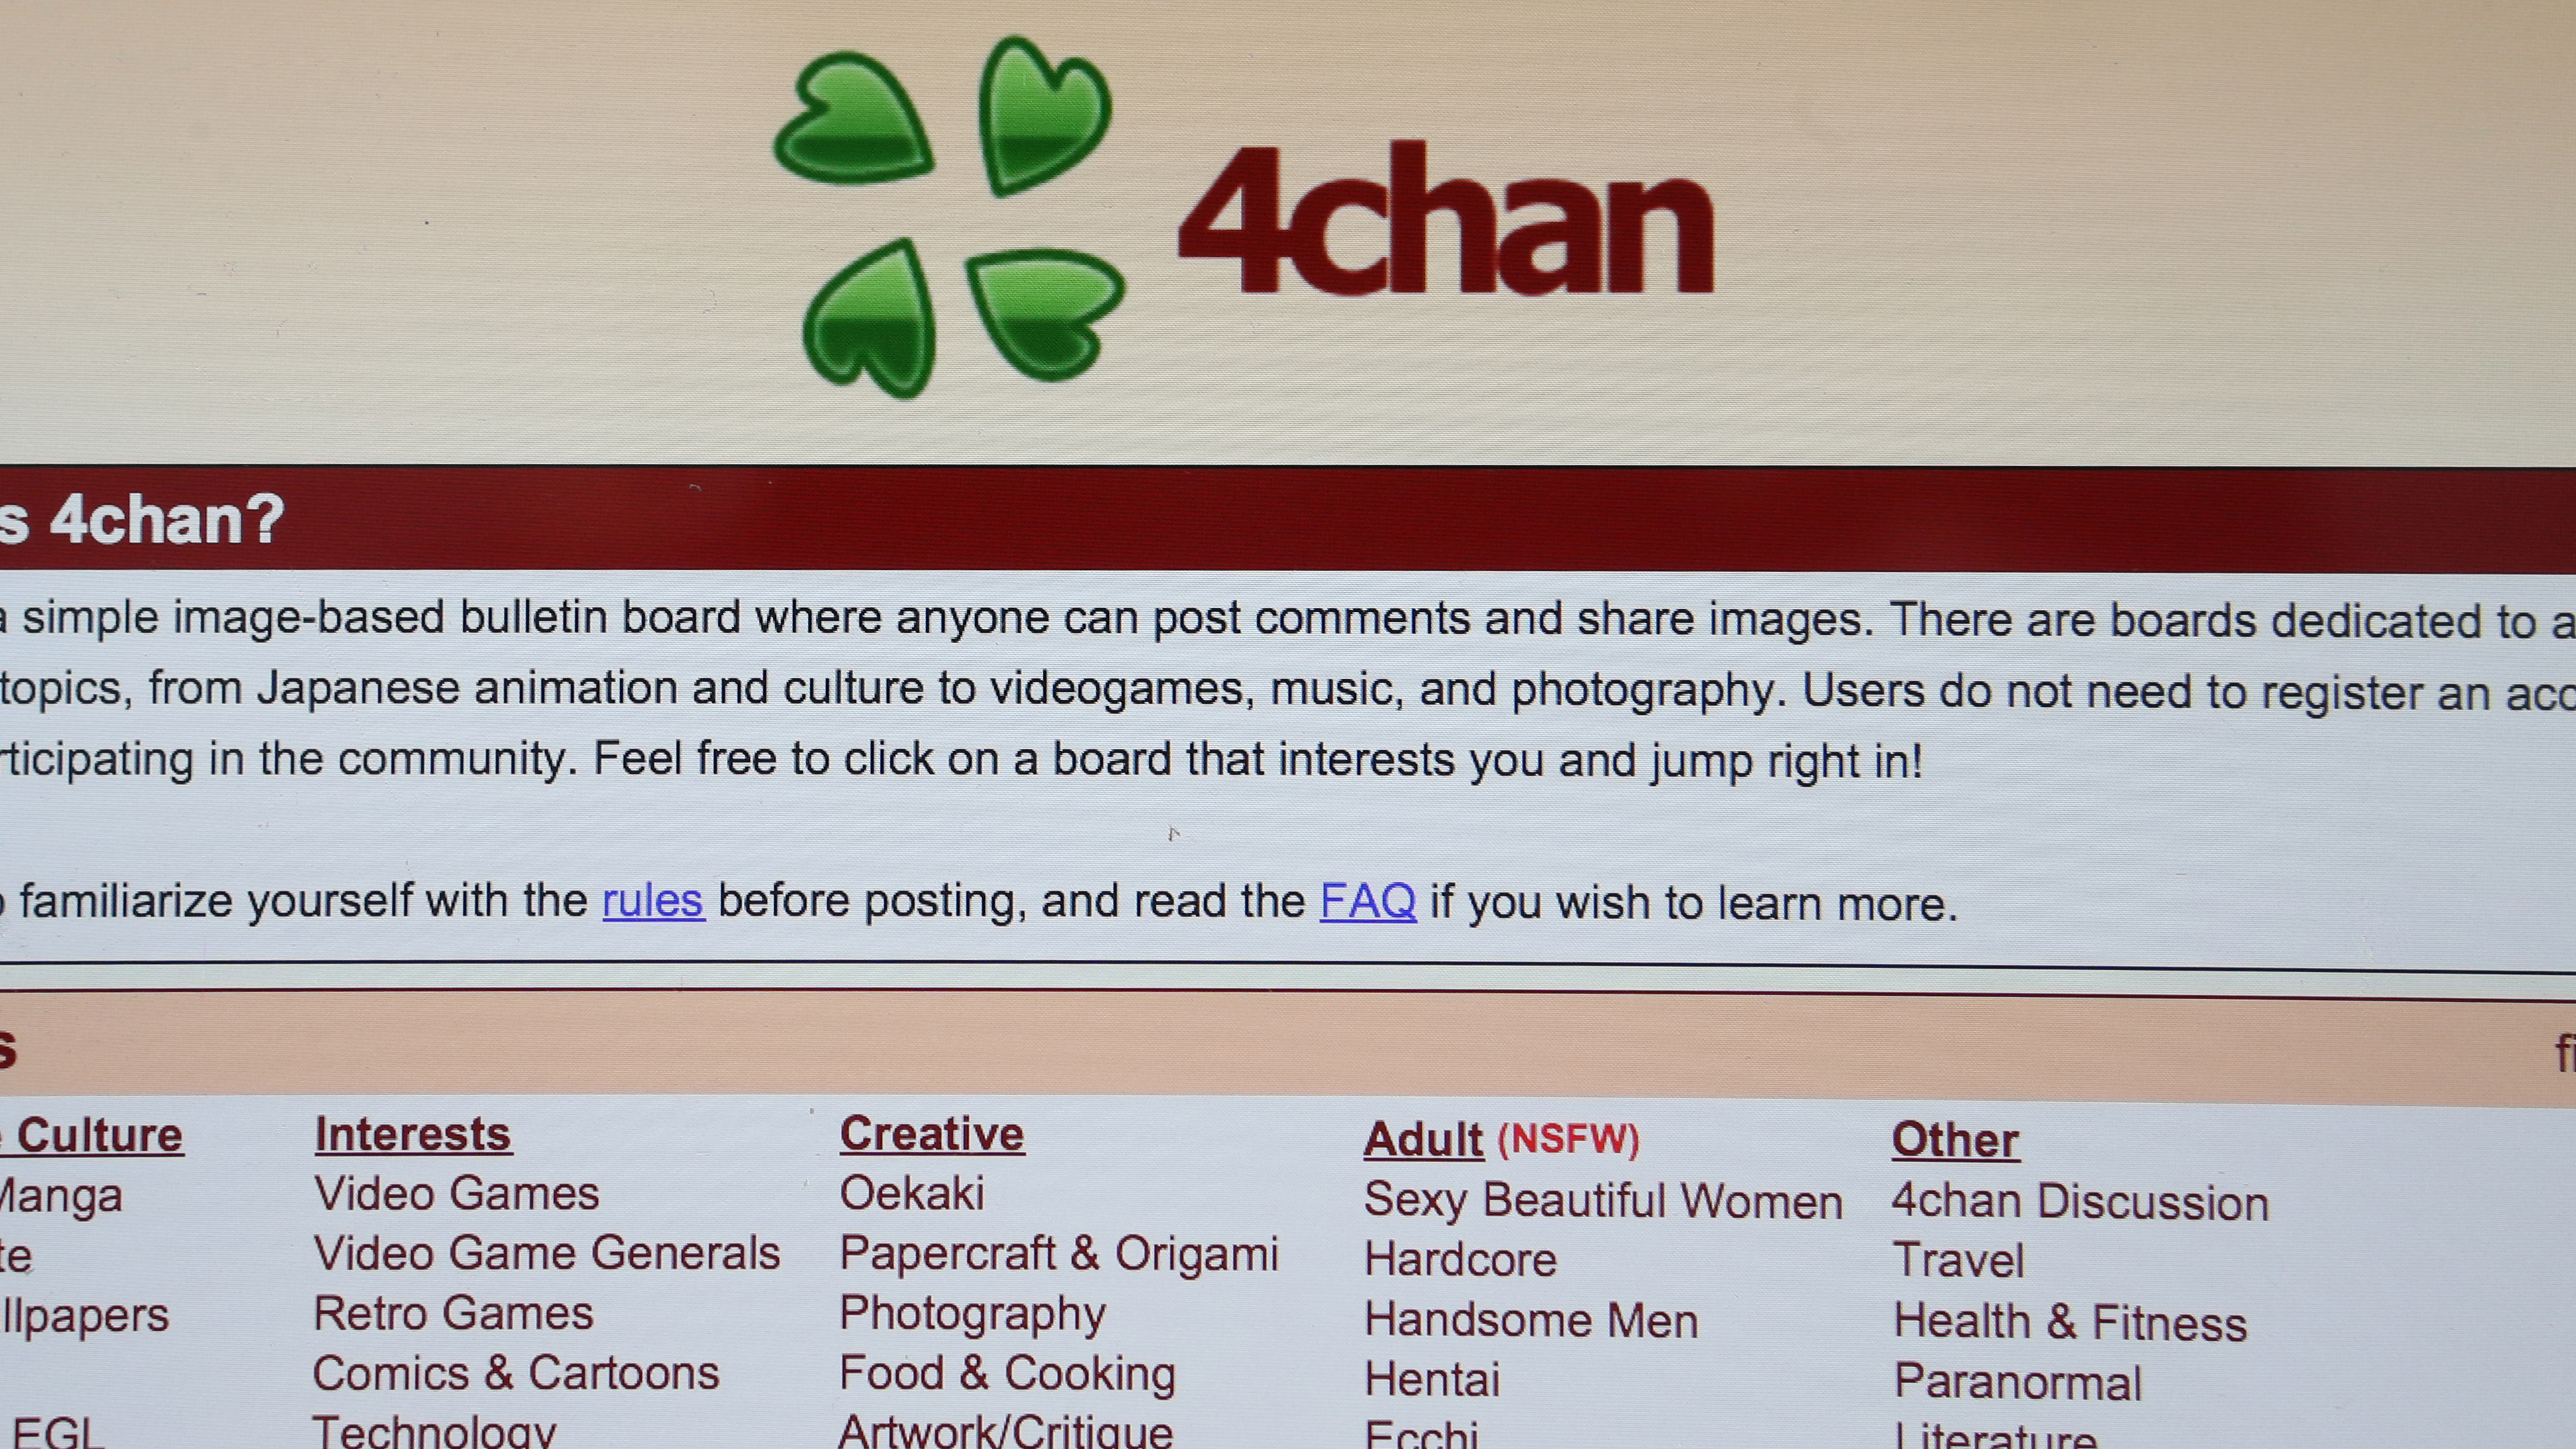 What is 4chan?